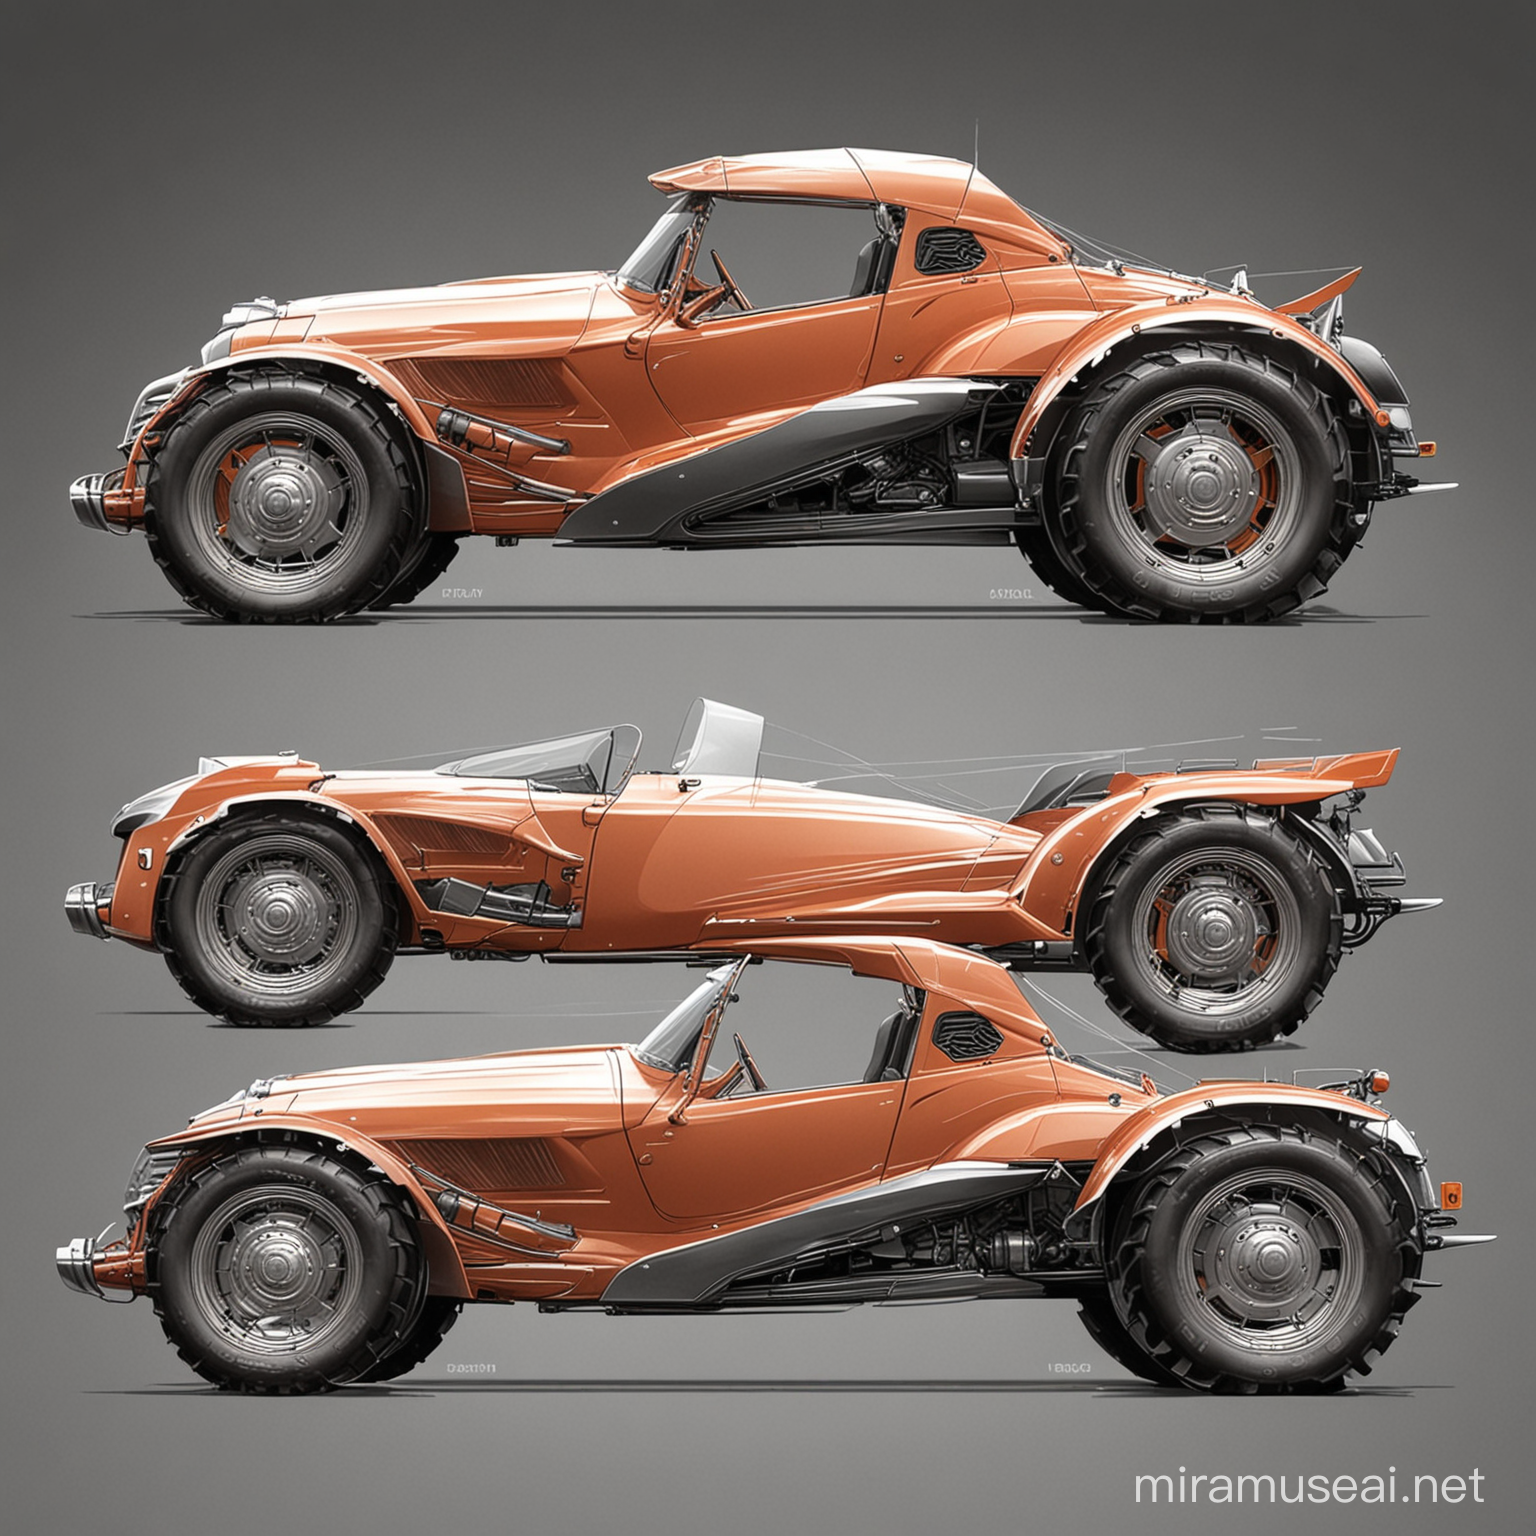 Futuristic Tractor Design Sports Car Inspired Side View Drawings